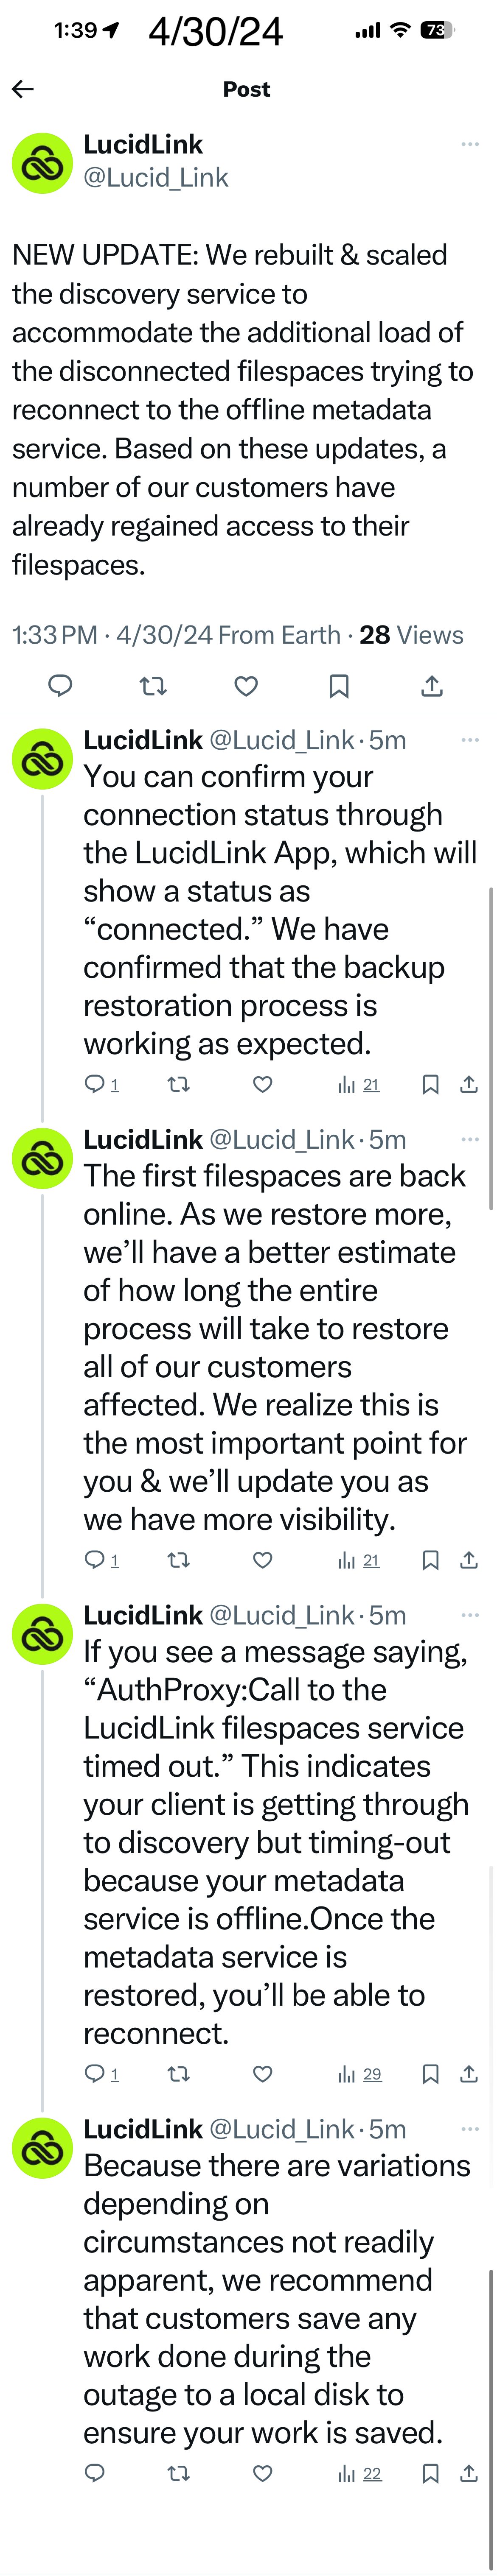 Outage hits LucidLink, updates happening throughout the day, should be coming back online for most users 13